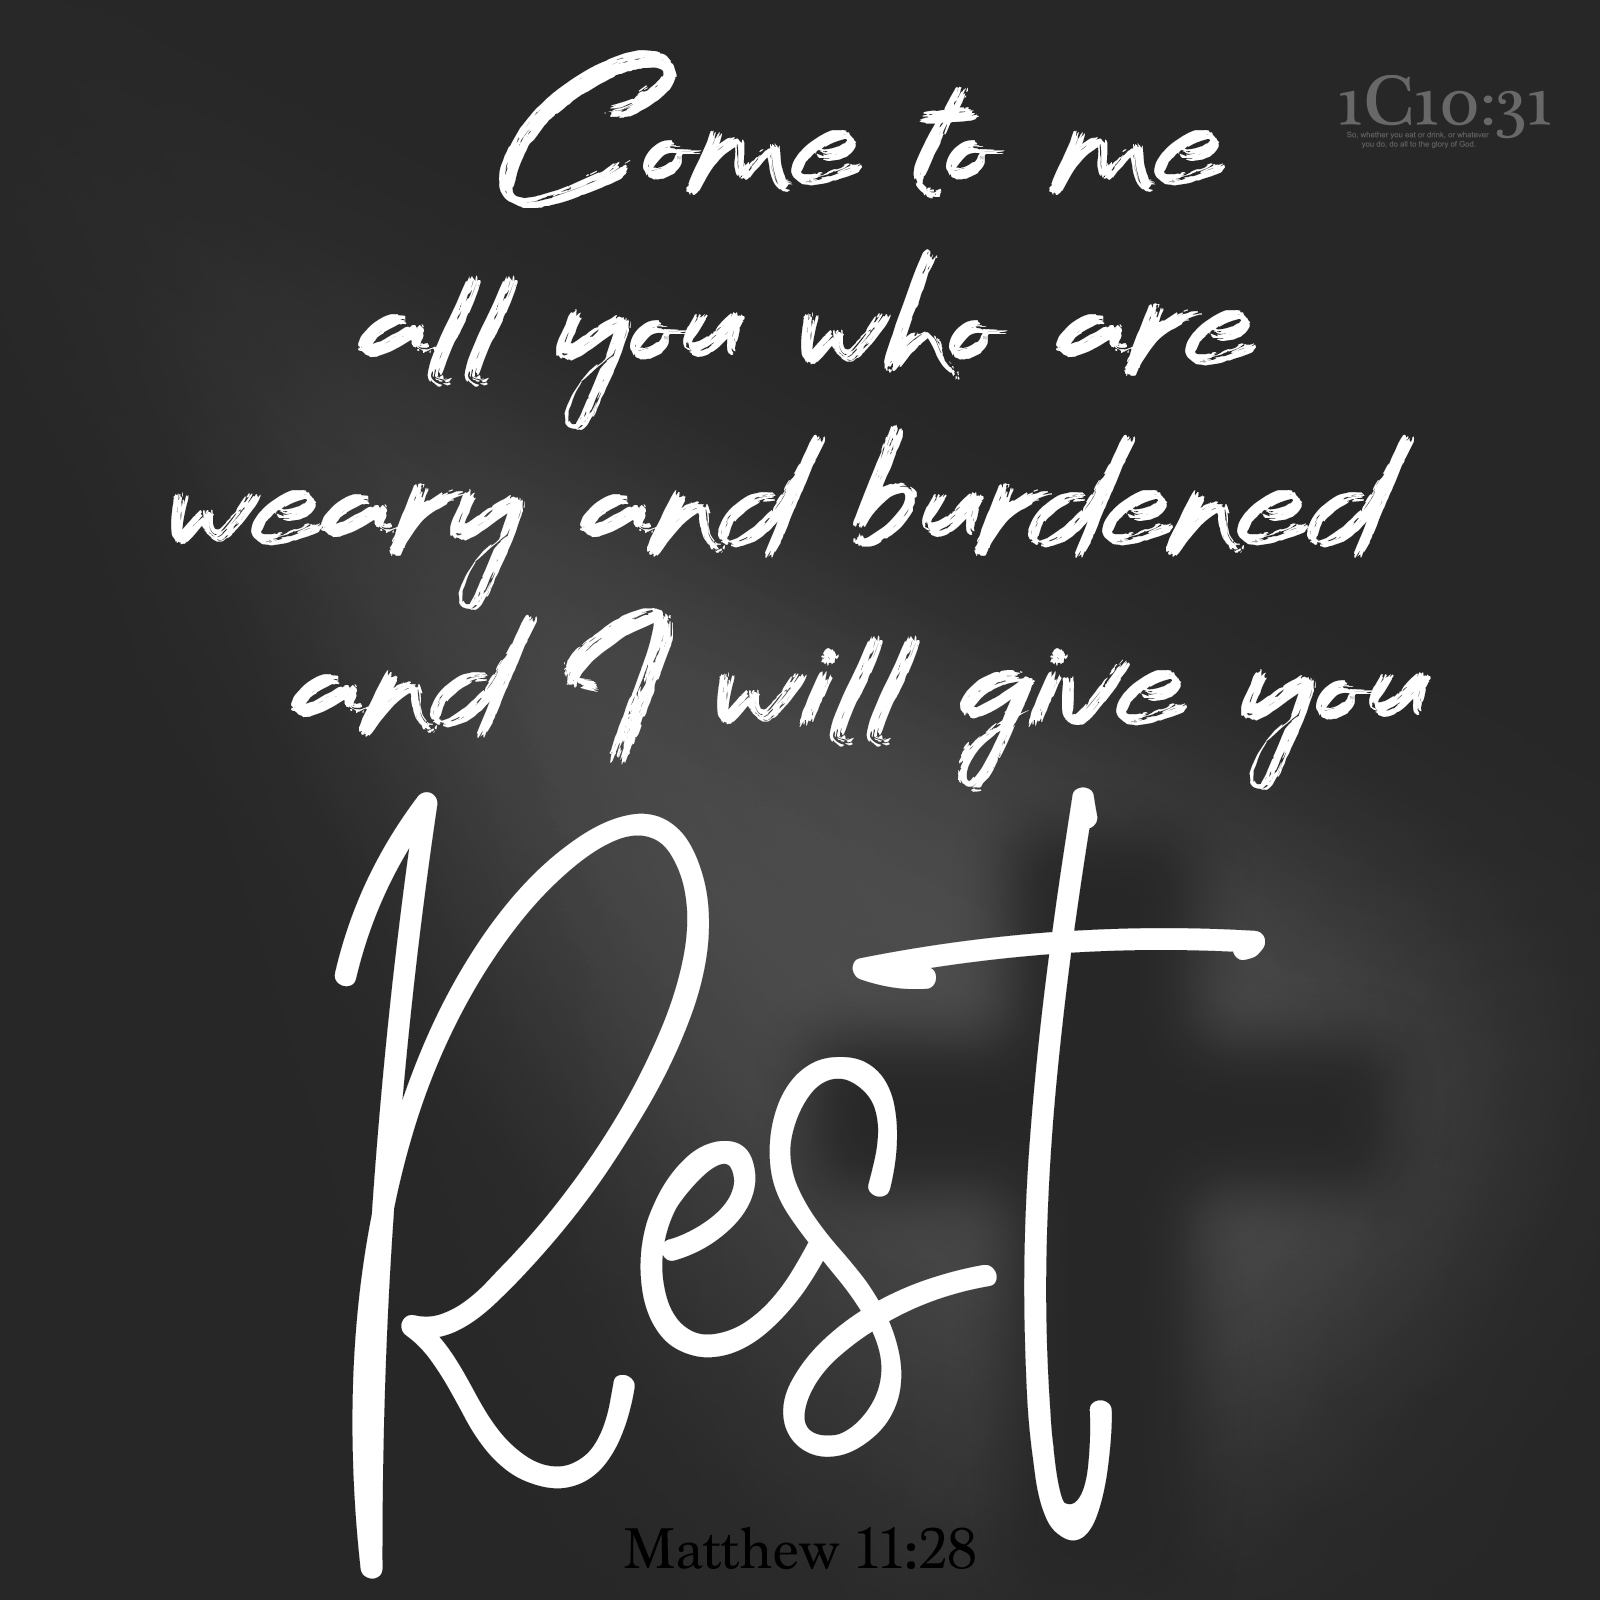 Matthew 11:28 “Come to me, all you who are weary and burdened, and I will give you rest.